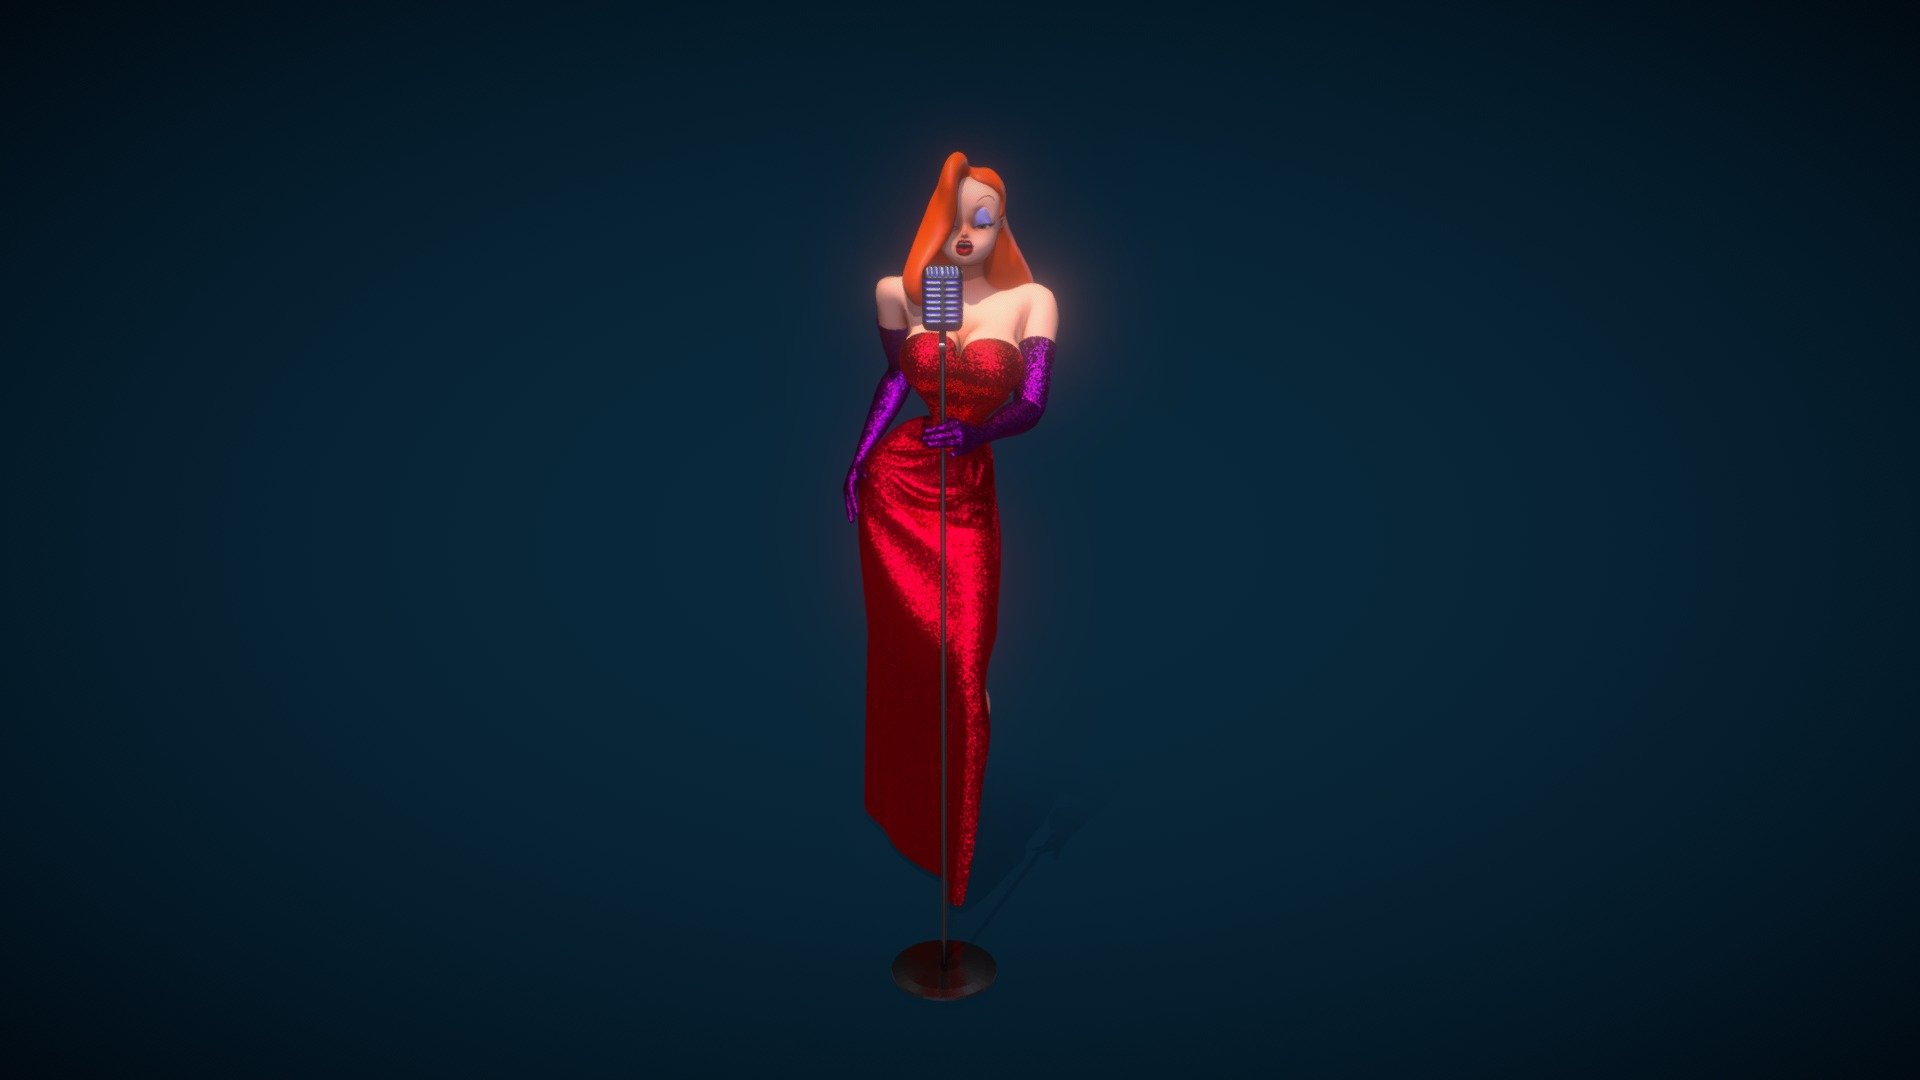 Fan art of Jessica Rabbit. 
She's not bad, she is just drawn that way. 

I'm hoping to build her a proper rig and do an animation of her Singing scene from the film 3d model